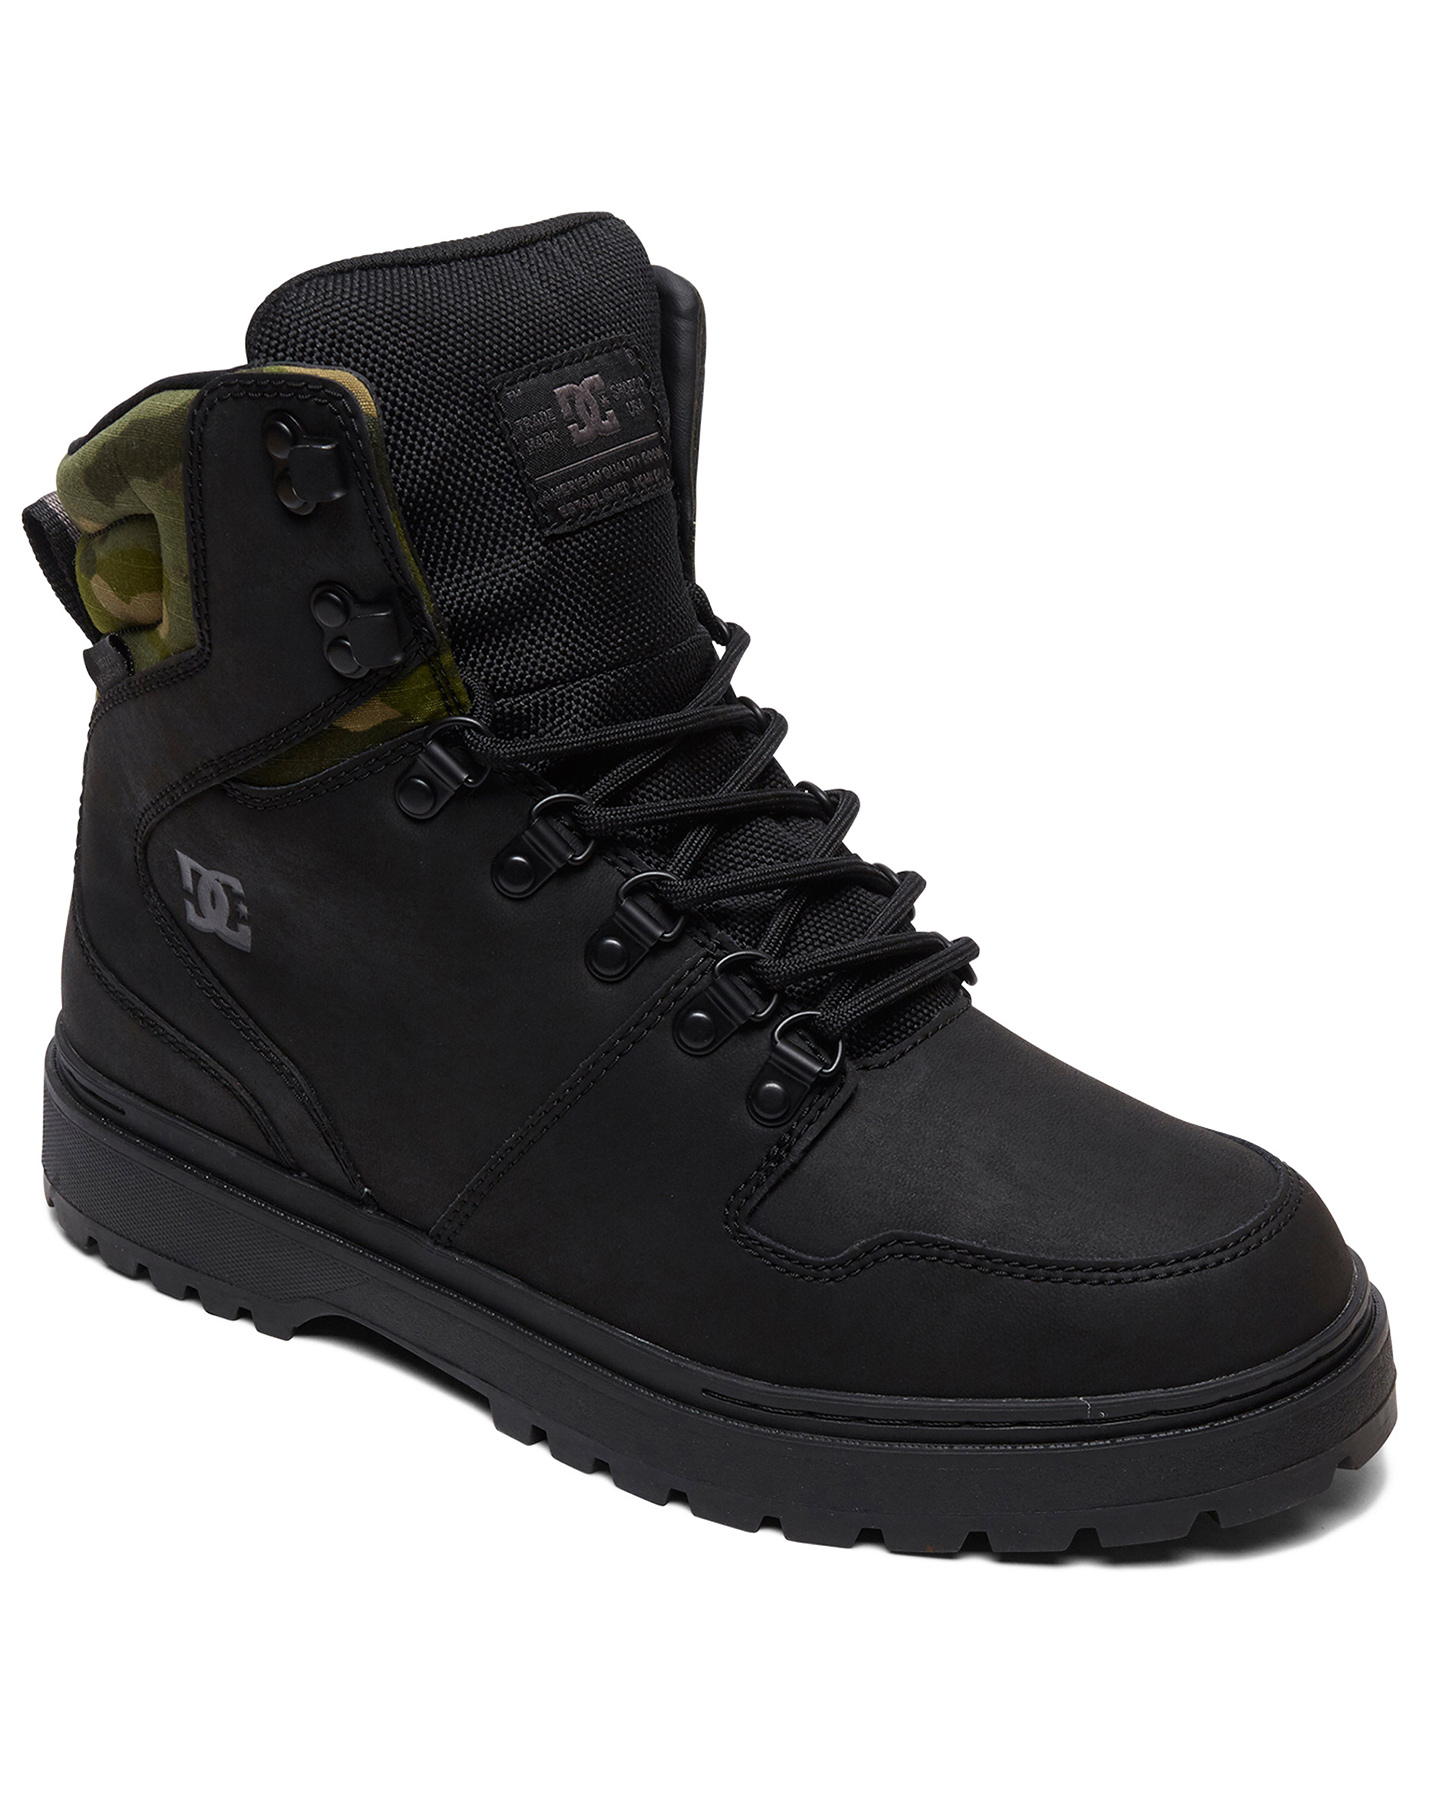 Dc Shoes Mens Peary Winter Boots - Black Camo | SurfStitch